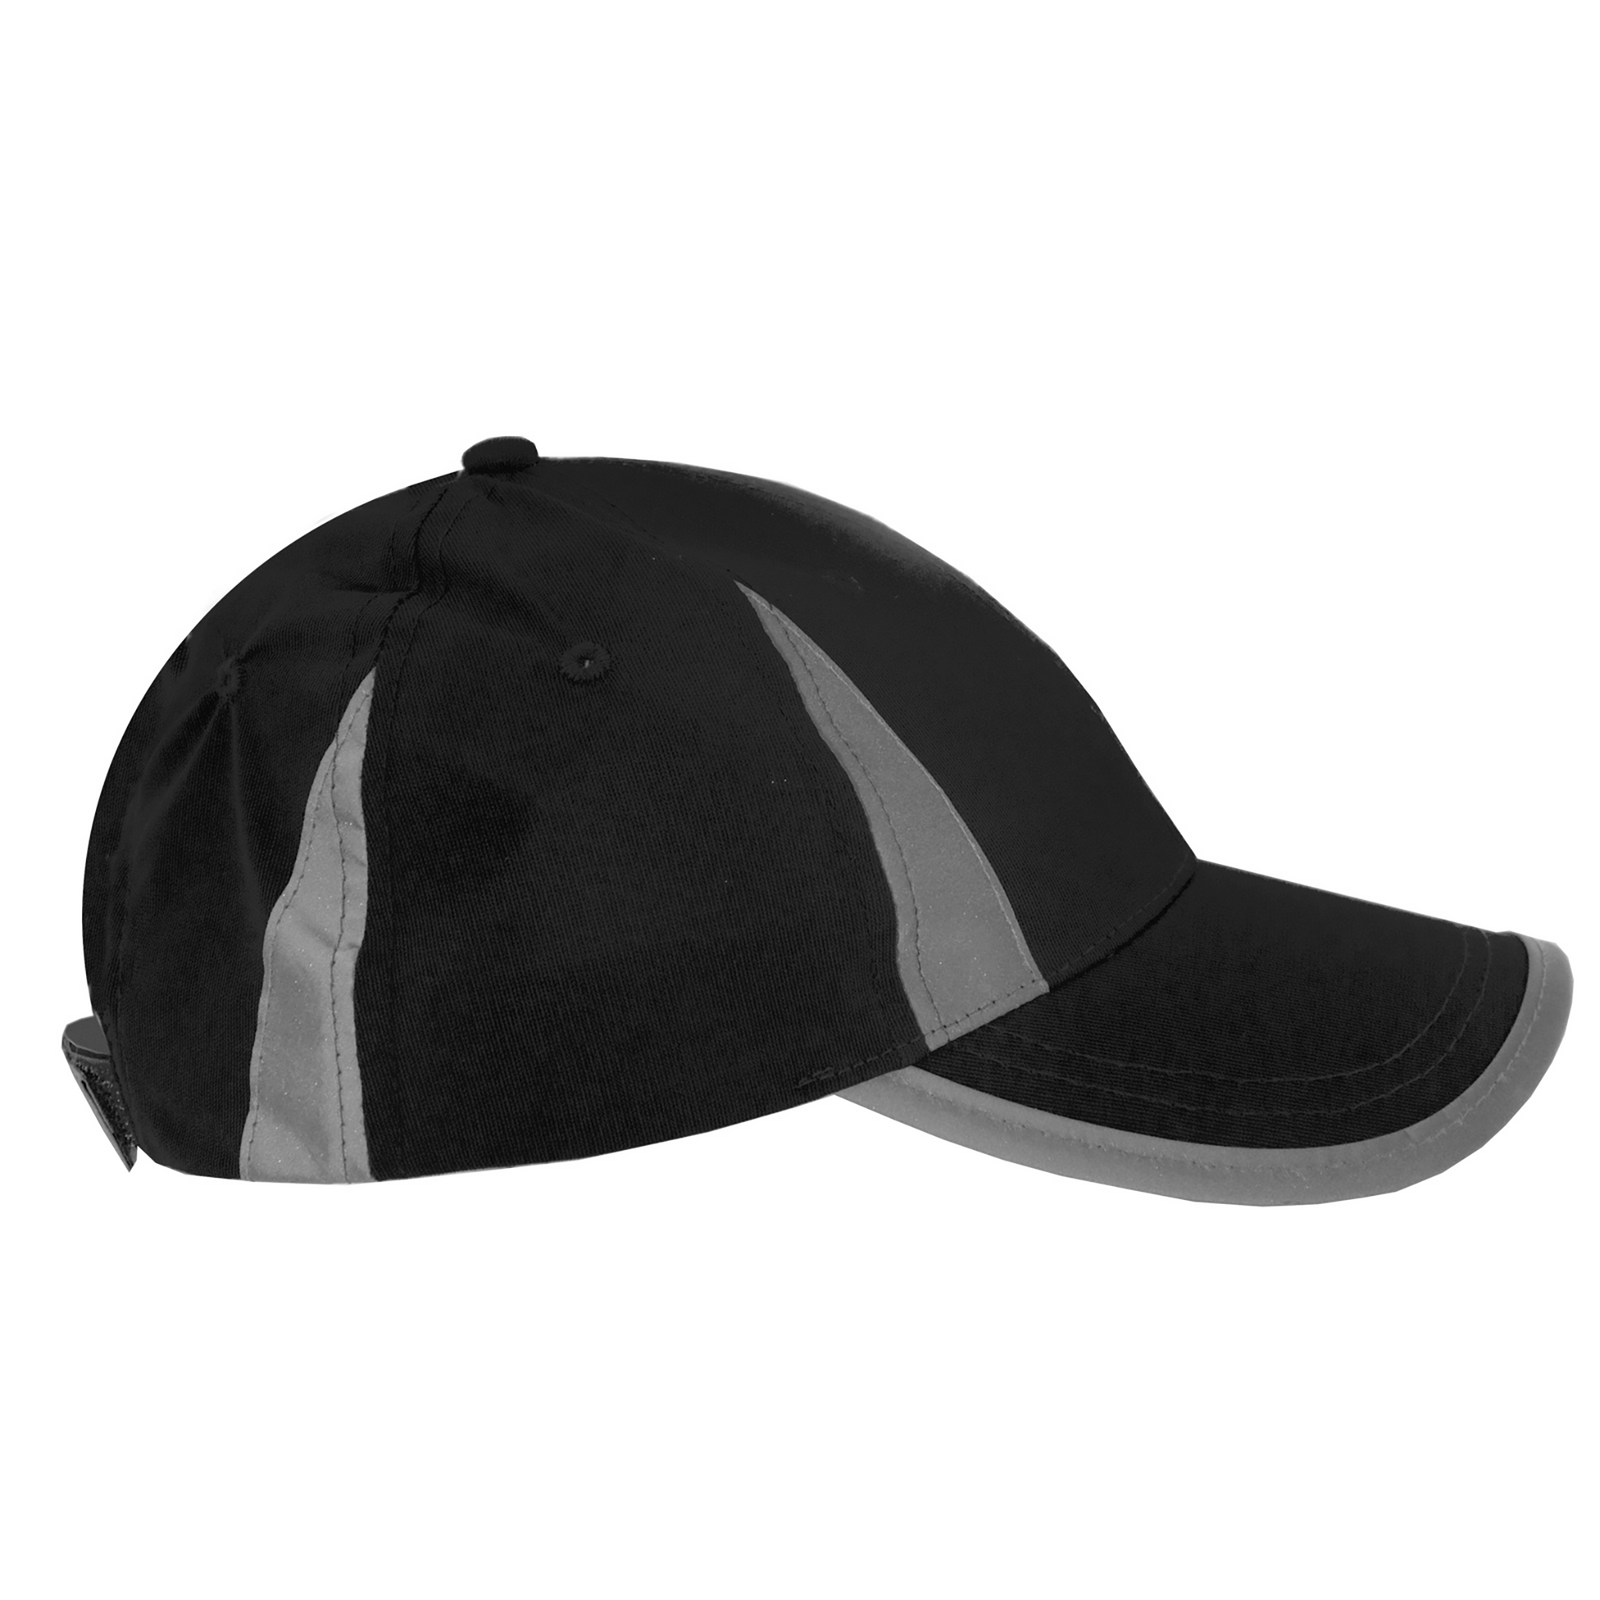 Side view of the hi-vis black JORESTECH safety cap with reflective stripes